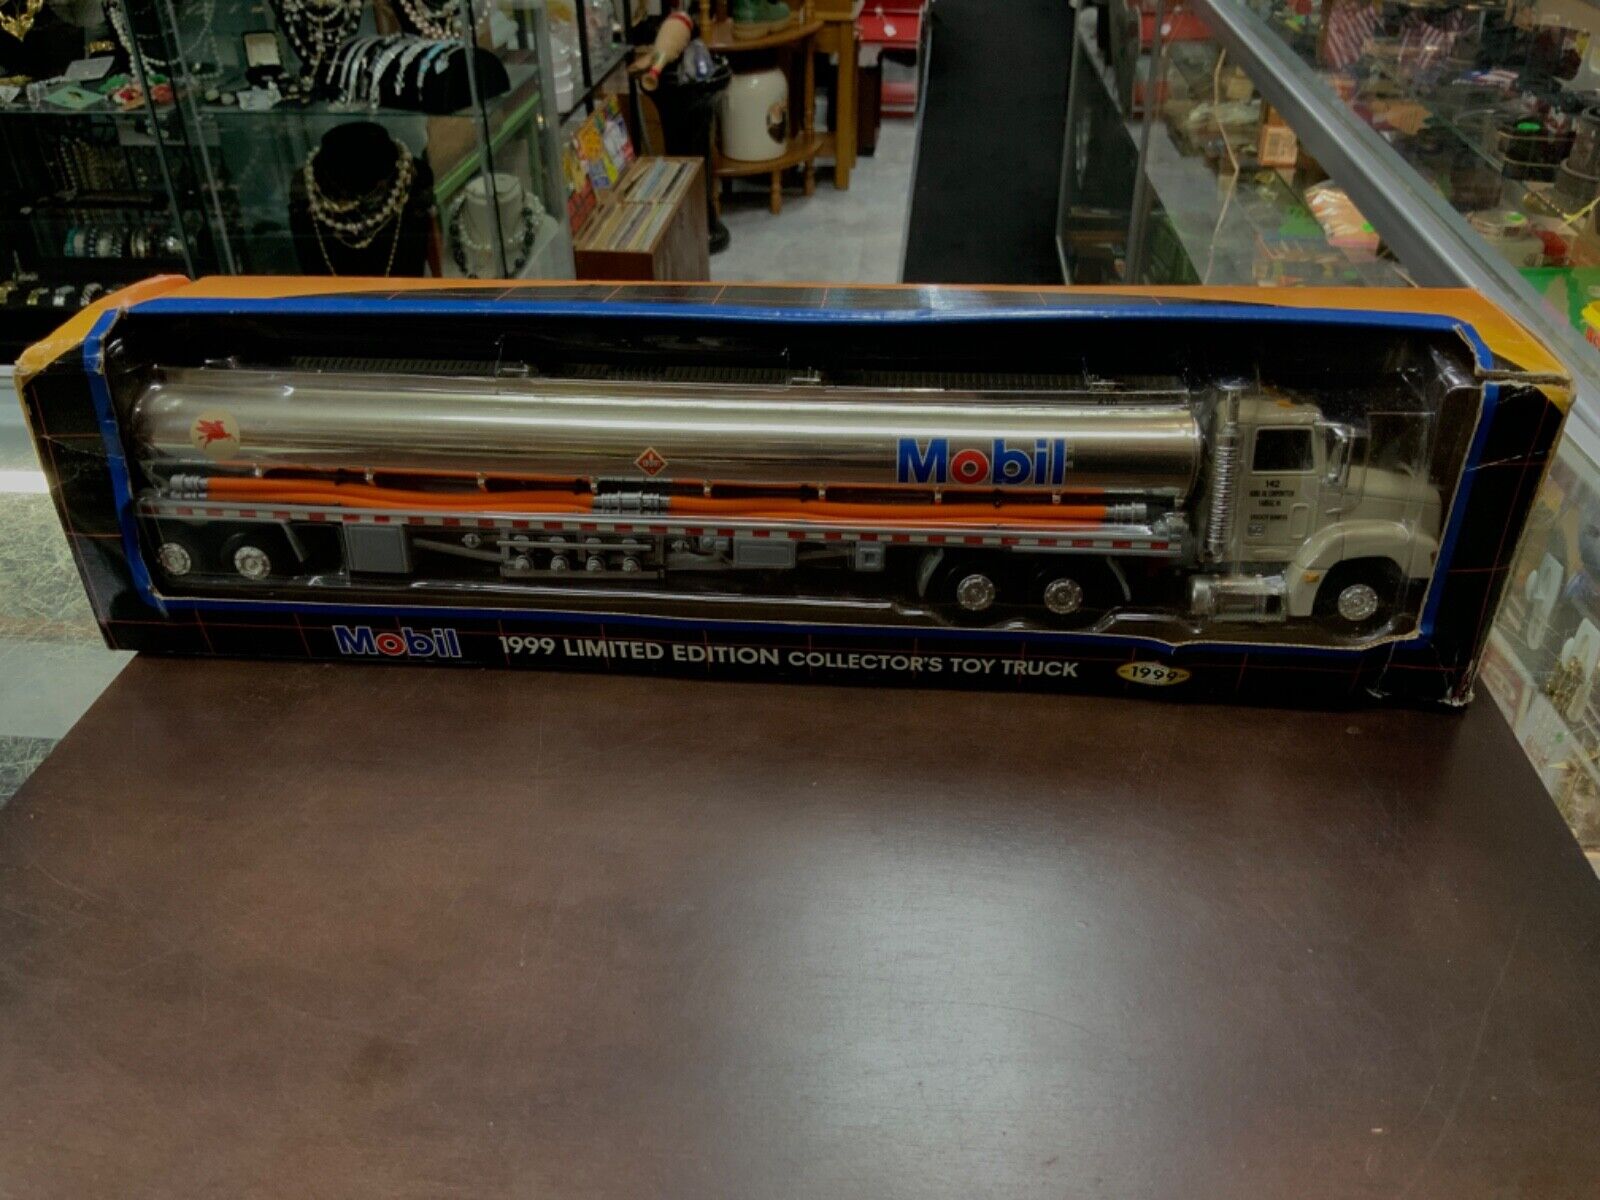 Mobil 1999 Limited Edition Collectors Toy Truck - Preowned (B)